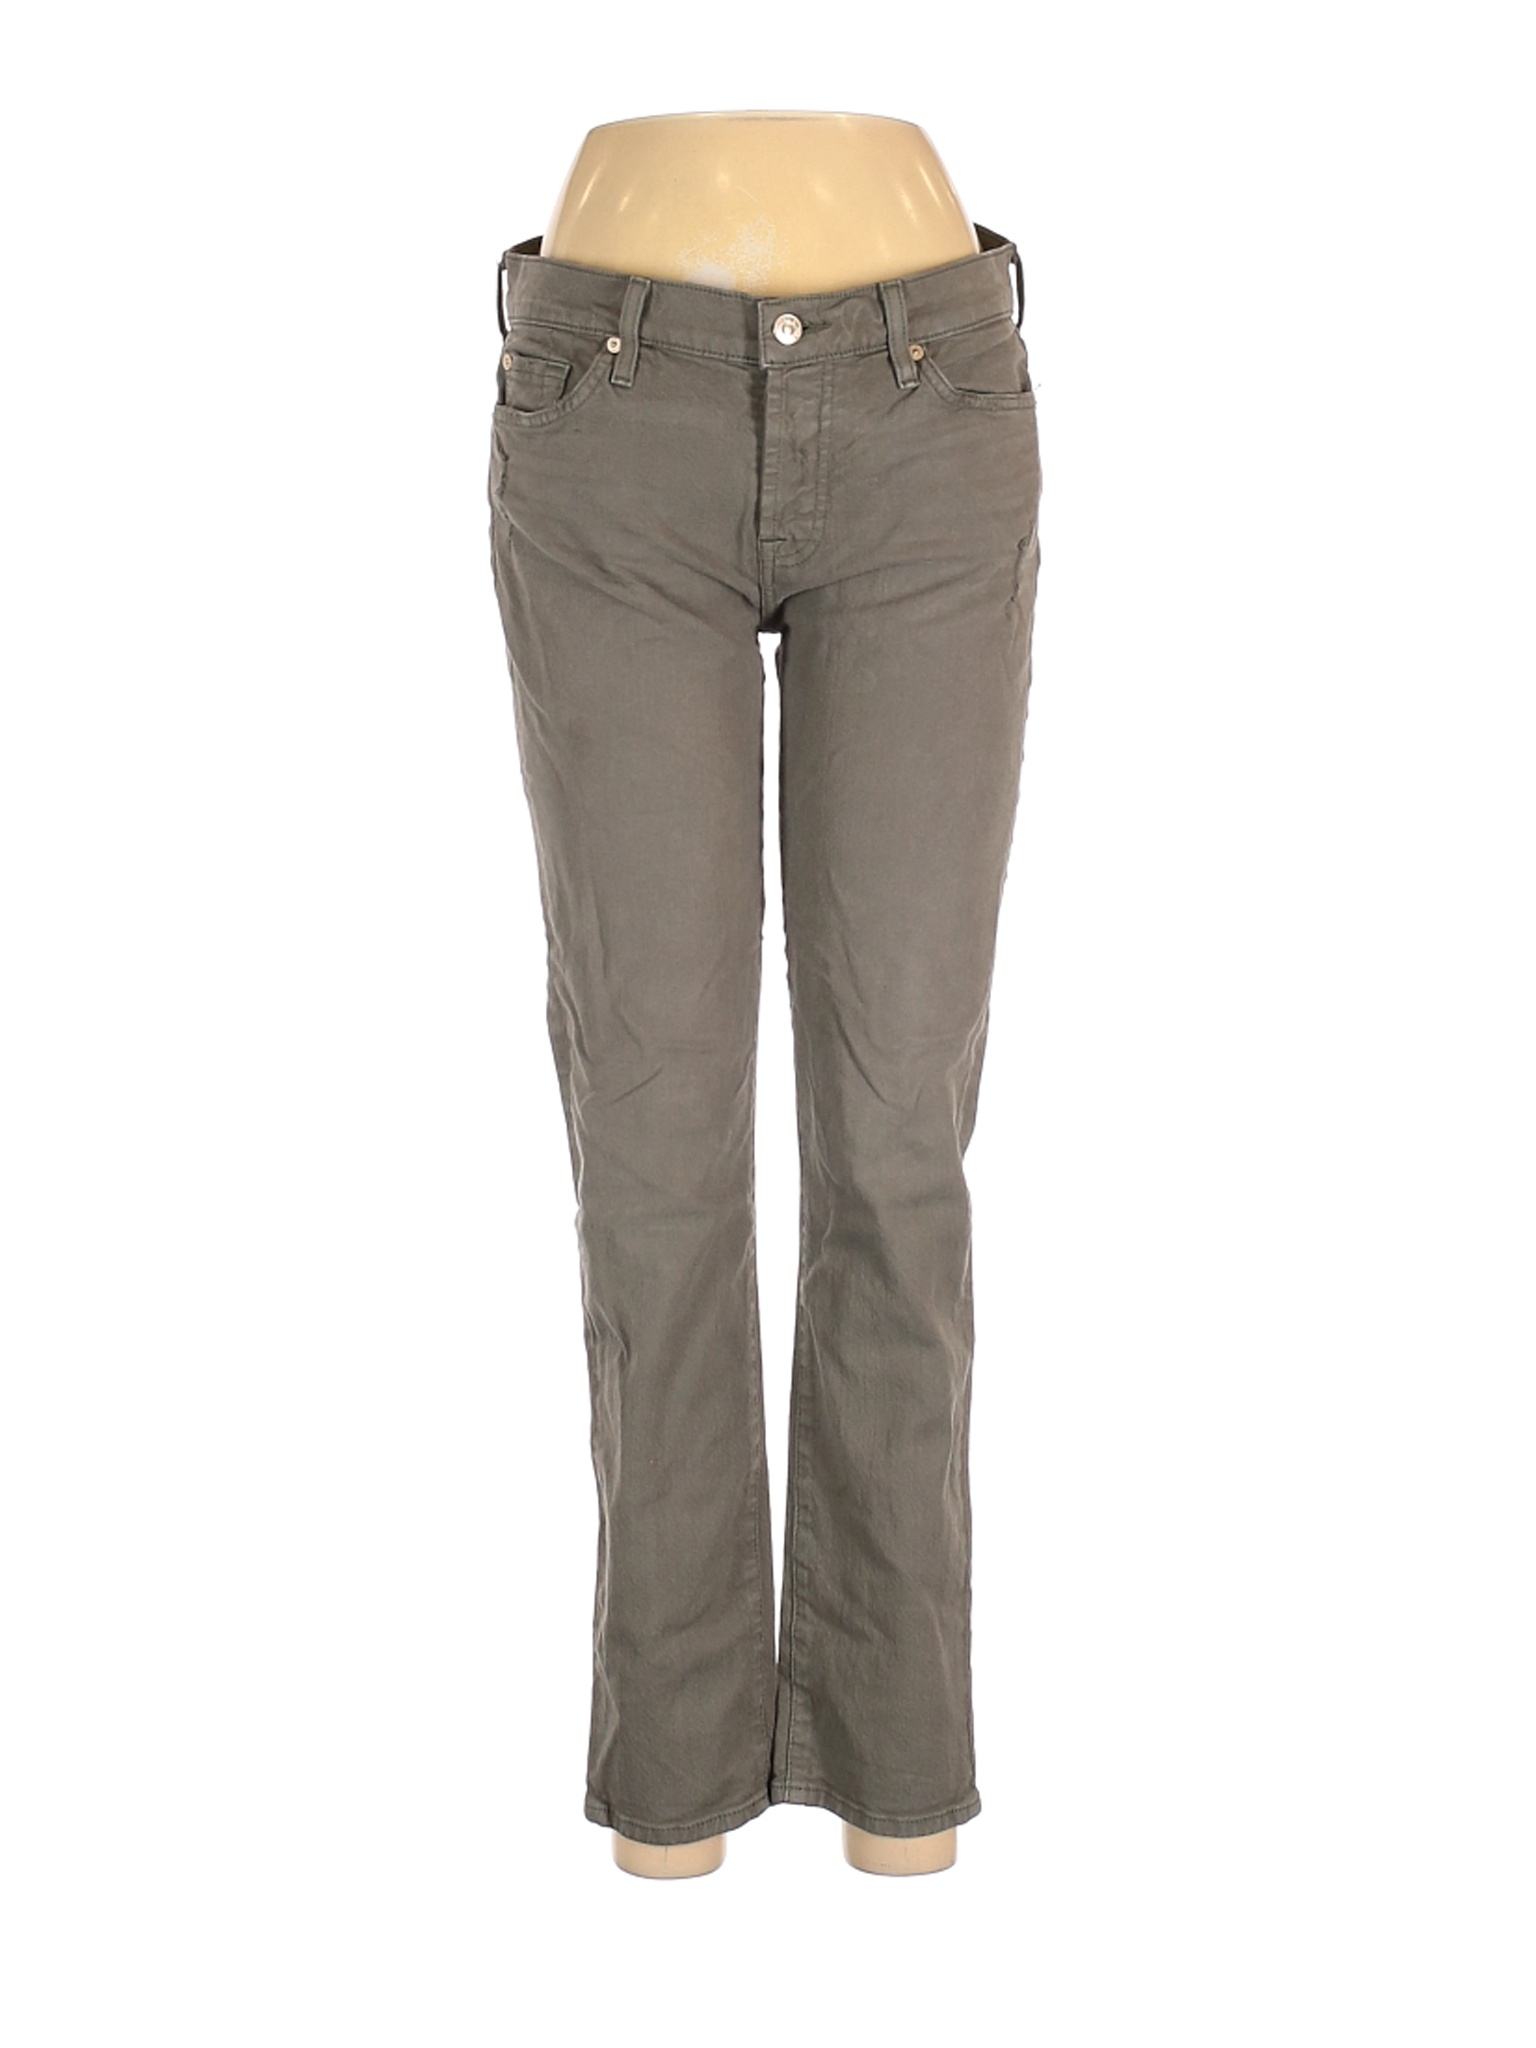 7 For All Mankind Solid Green Jeans 28 Waist - 83% off | thredUP